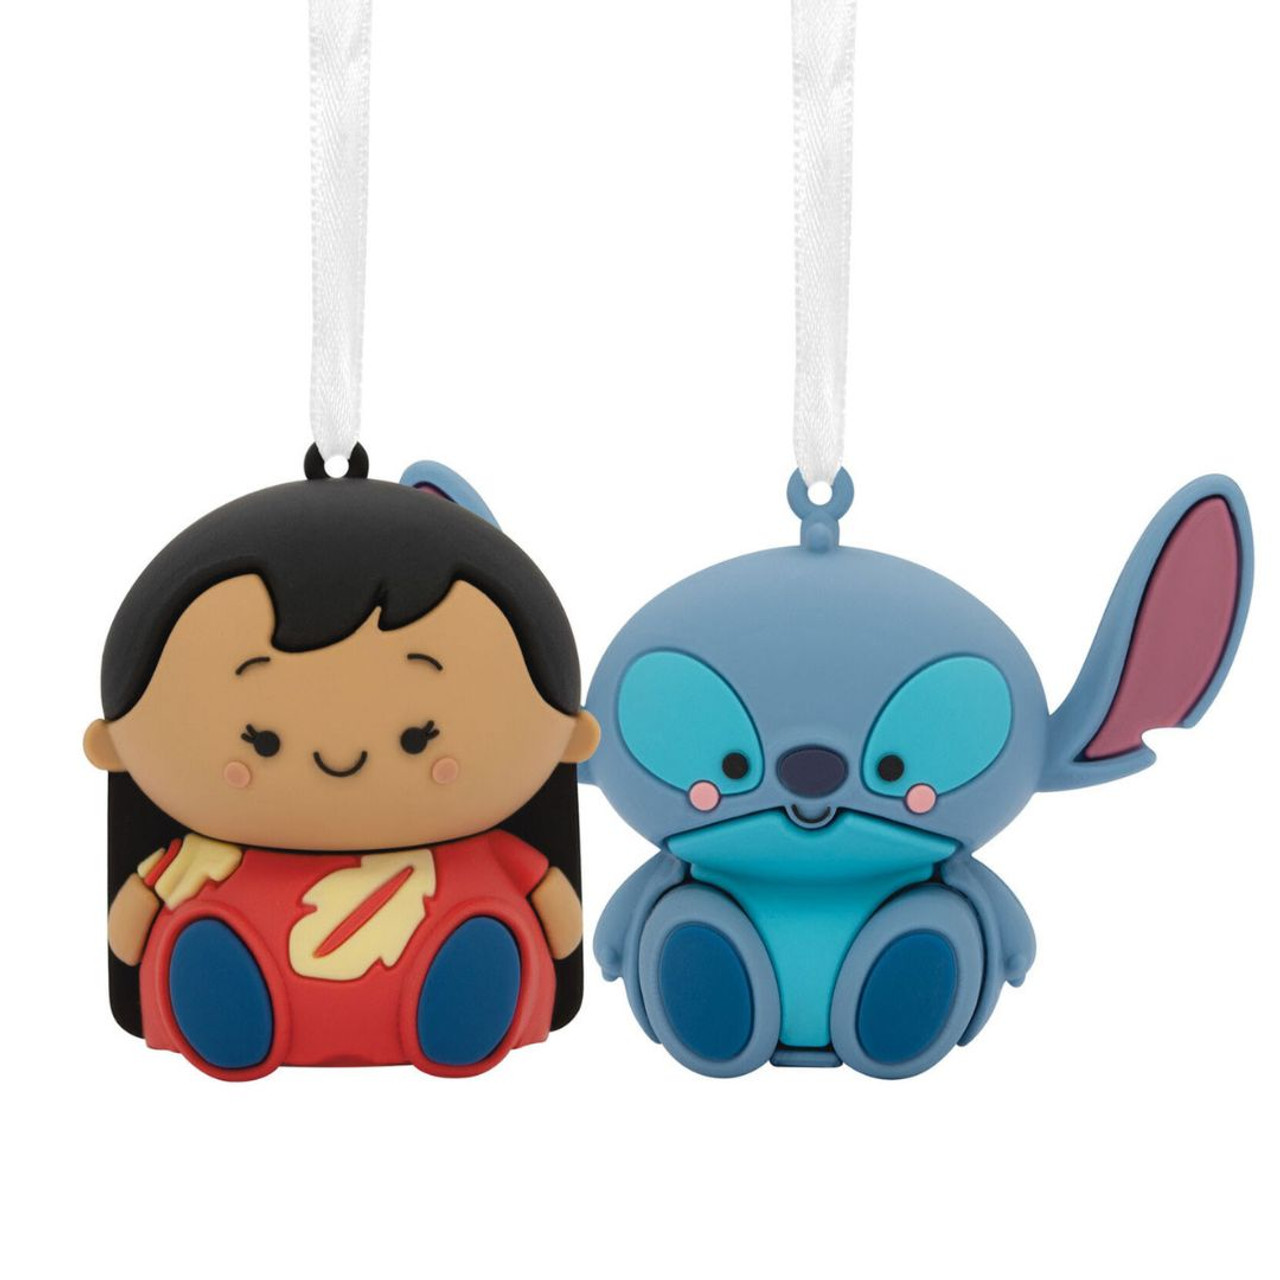 Stitch Hoodie: The Coolest and Funniest Pullover for Lilo & Stitch Fans